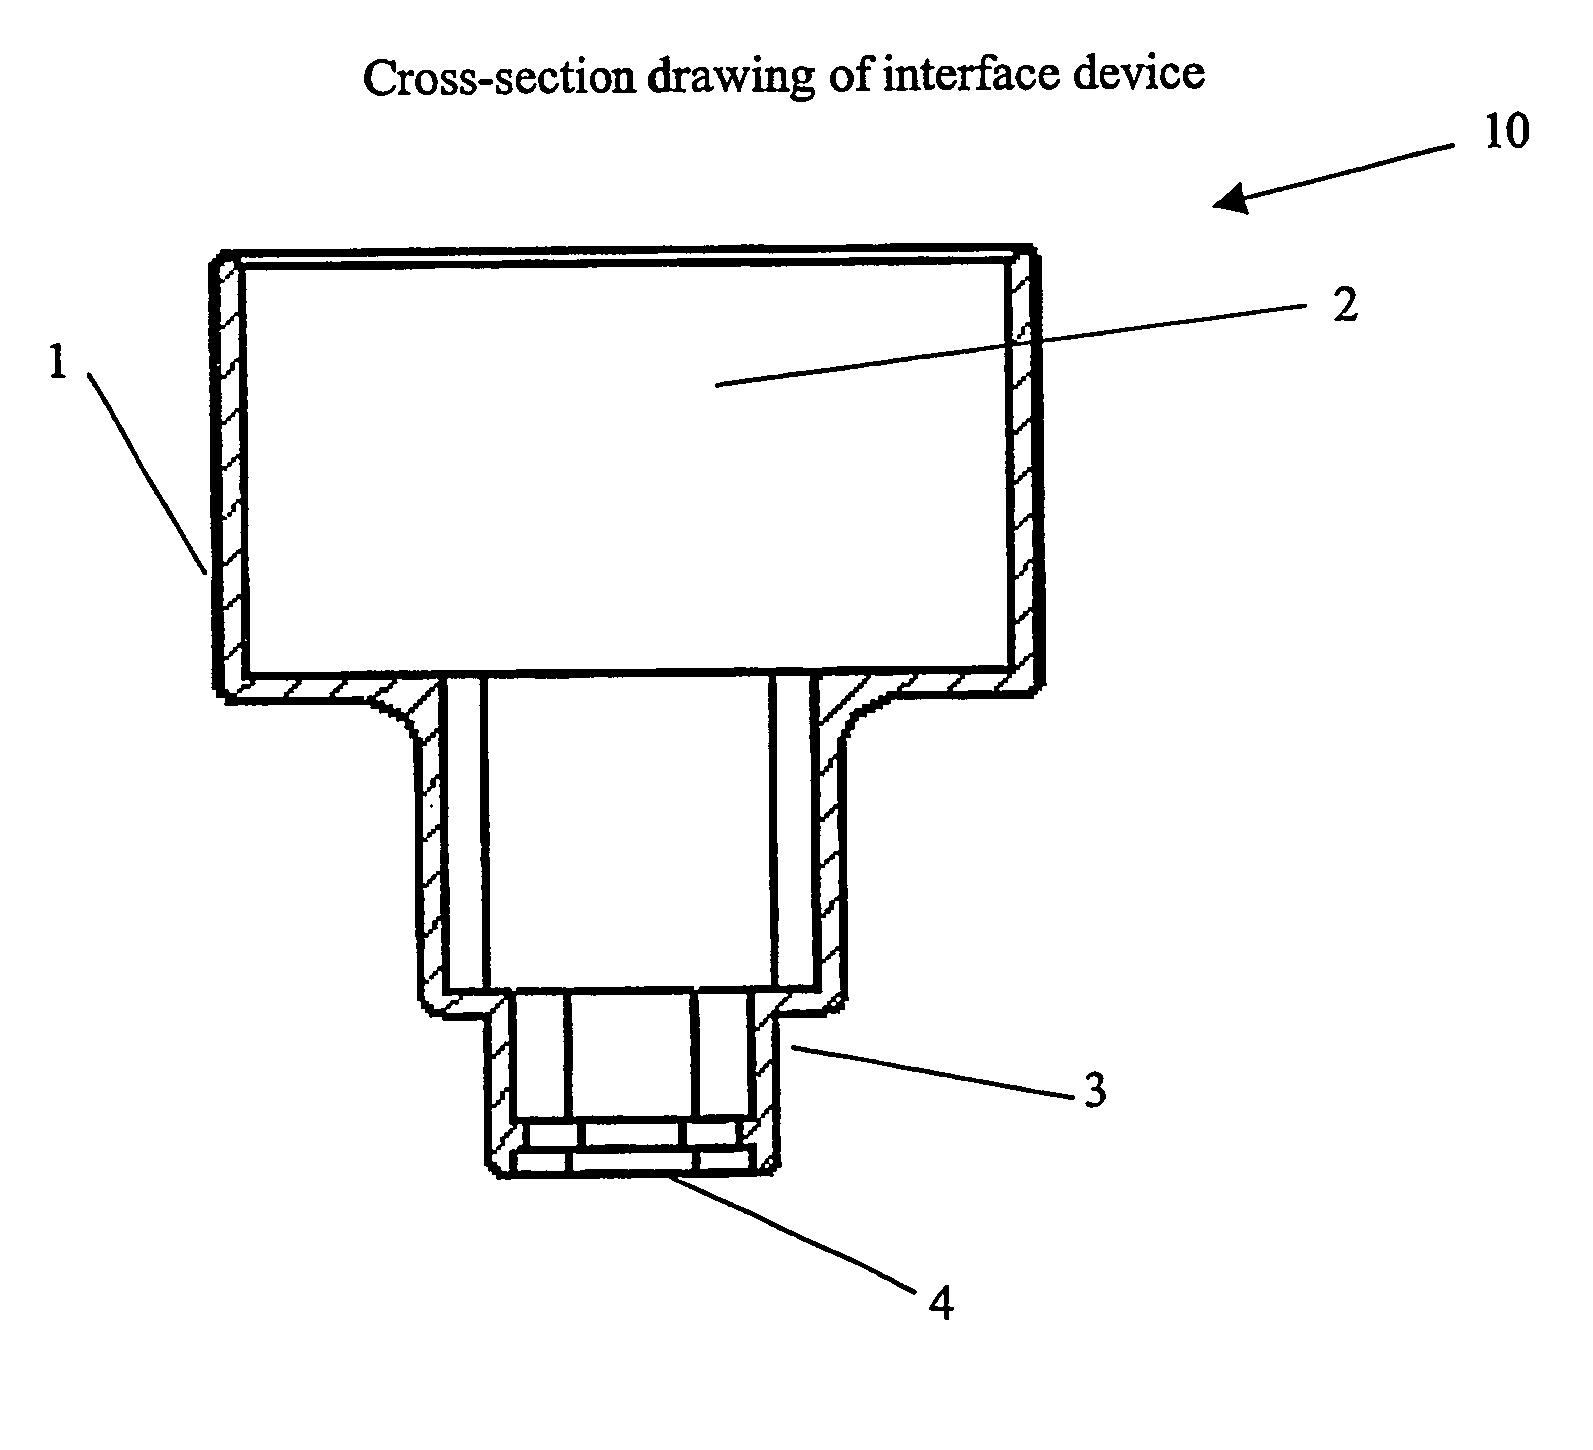 Ultrasound interfacing device for tissue imaging